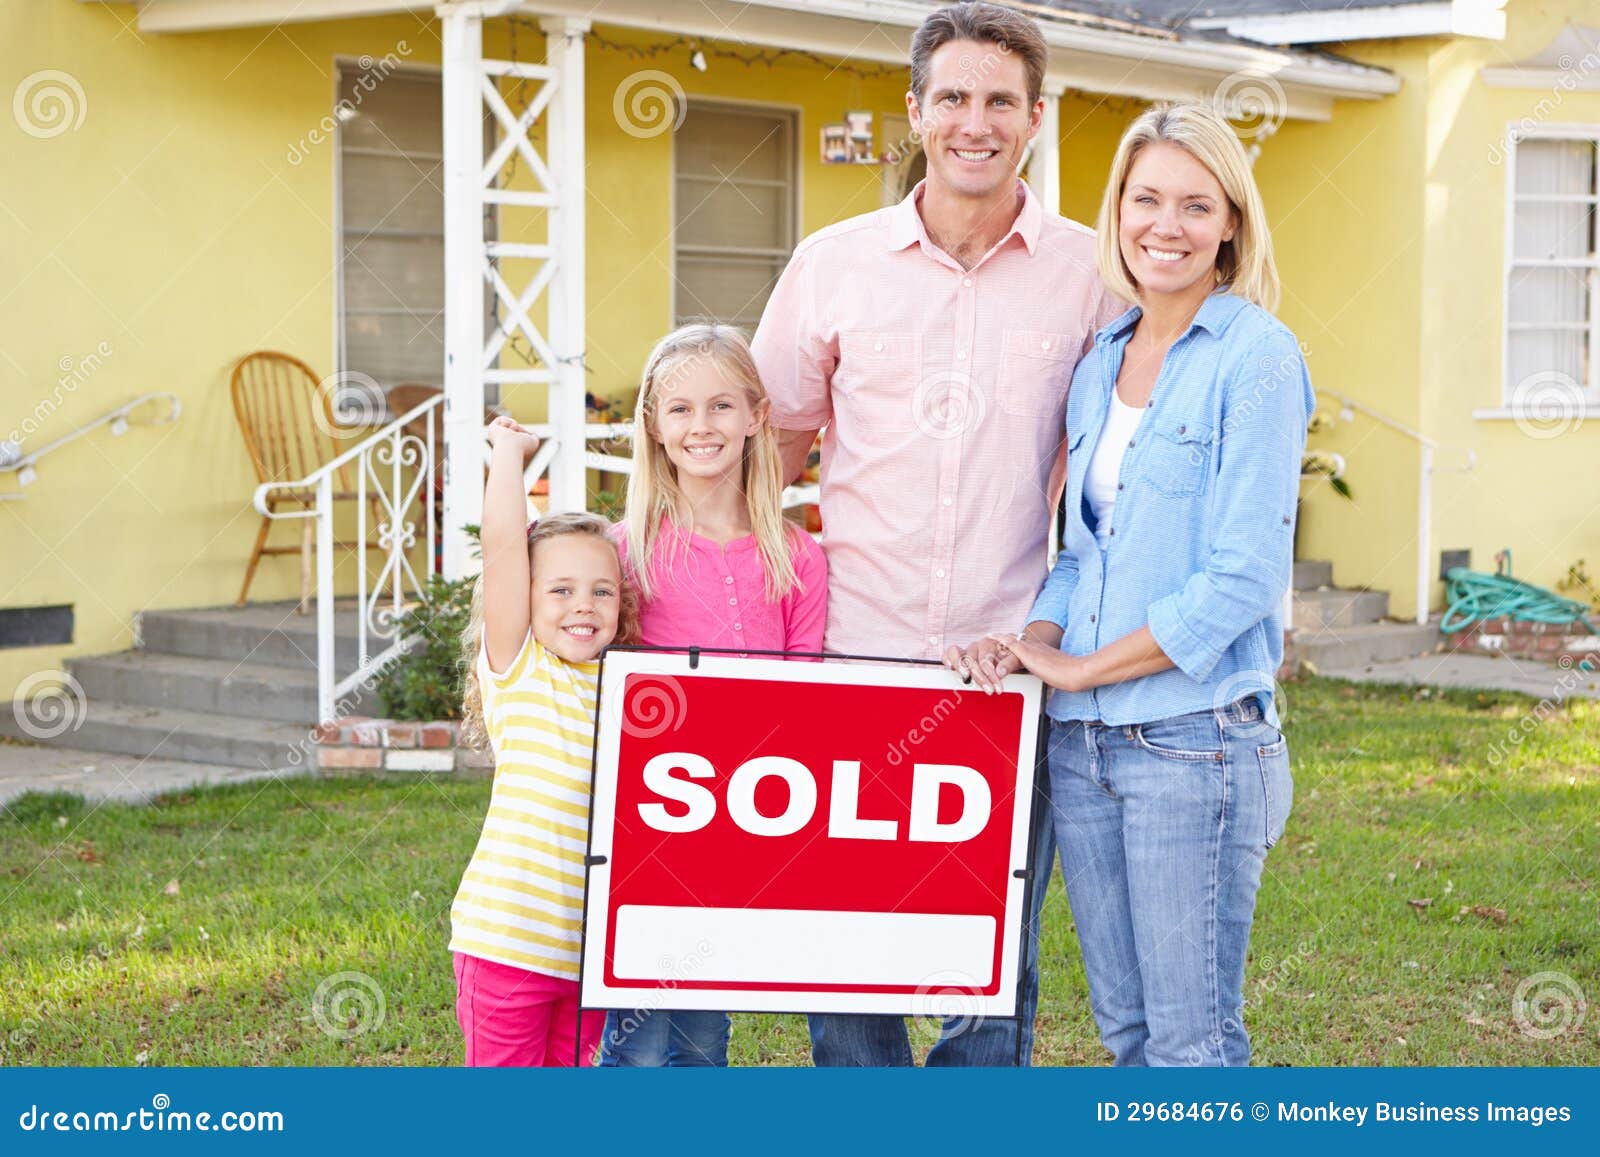 family standing by sold sign outside home